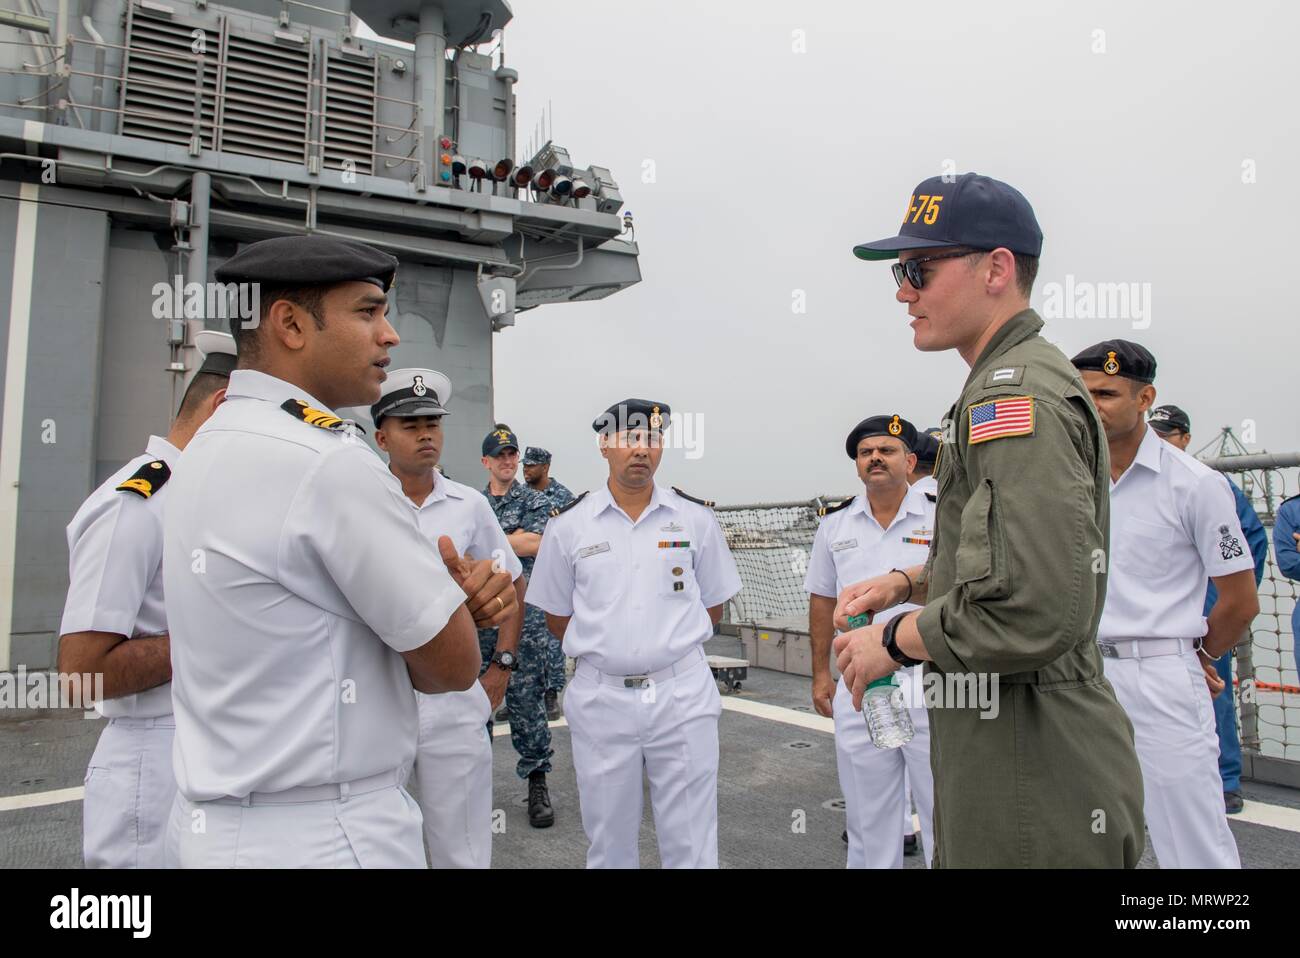 170711-N-VR594-0673  CHENNAI, India (July 11, 2017) Lt. Joseph Cusick, from Yorba Linda, Calif., gives a tour of the Ticonderoga-class guided-missile cruiser USS Princeton (CG 59) to members of the Indian Navy during Malabar 2017. Malabar 2017 is the latest in a continuing series of exercises between the Indian Navy, Japan Maritime Self Defense Force and U.S. Navy that has grown in scope and complexity over the years to address the variety of shared threats to maritime security in the Indo-Asia-Pacific region. (U.S. Navy photo by Mass Communication Specialist 3rd Class Kelsey J. Hockenberger/R Stock Photo